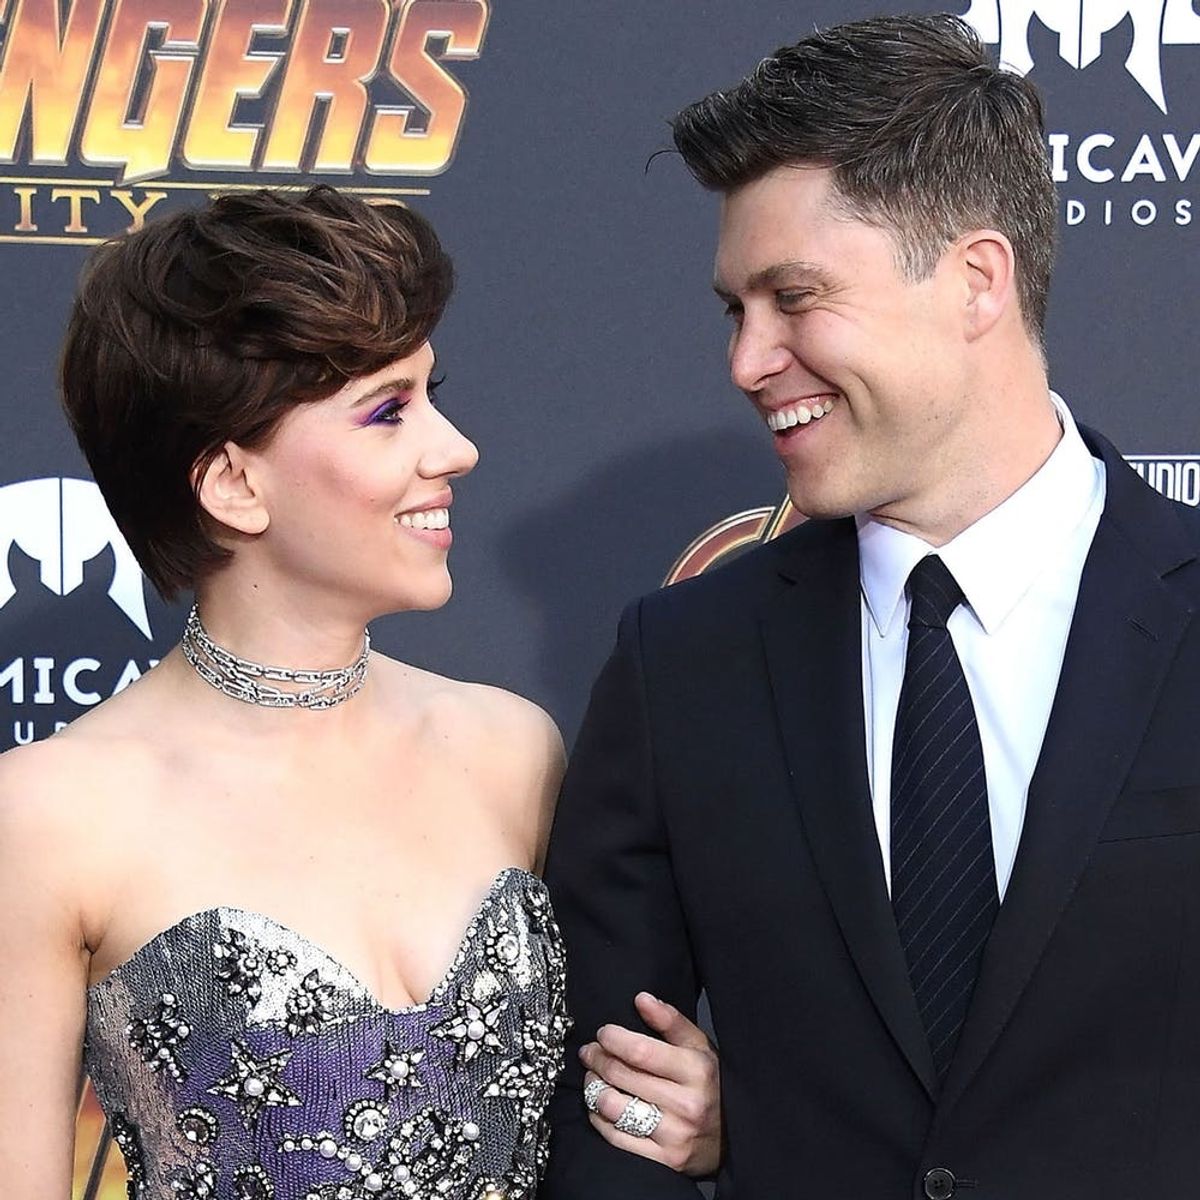 Scarlett Johansson and Colin Jost Just Made Their Red Carpet Debut as a Couple